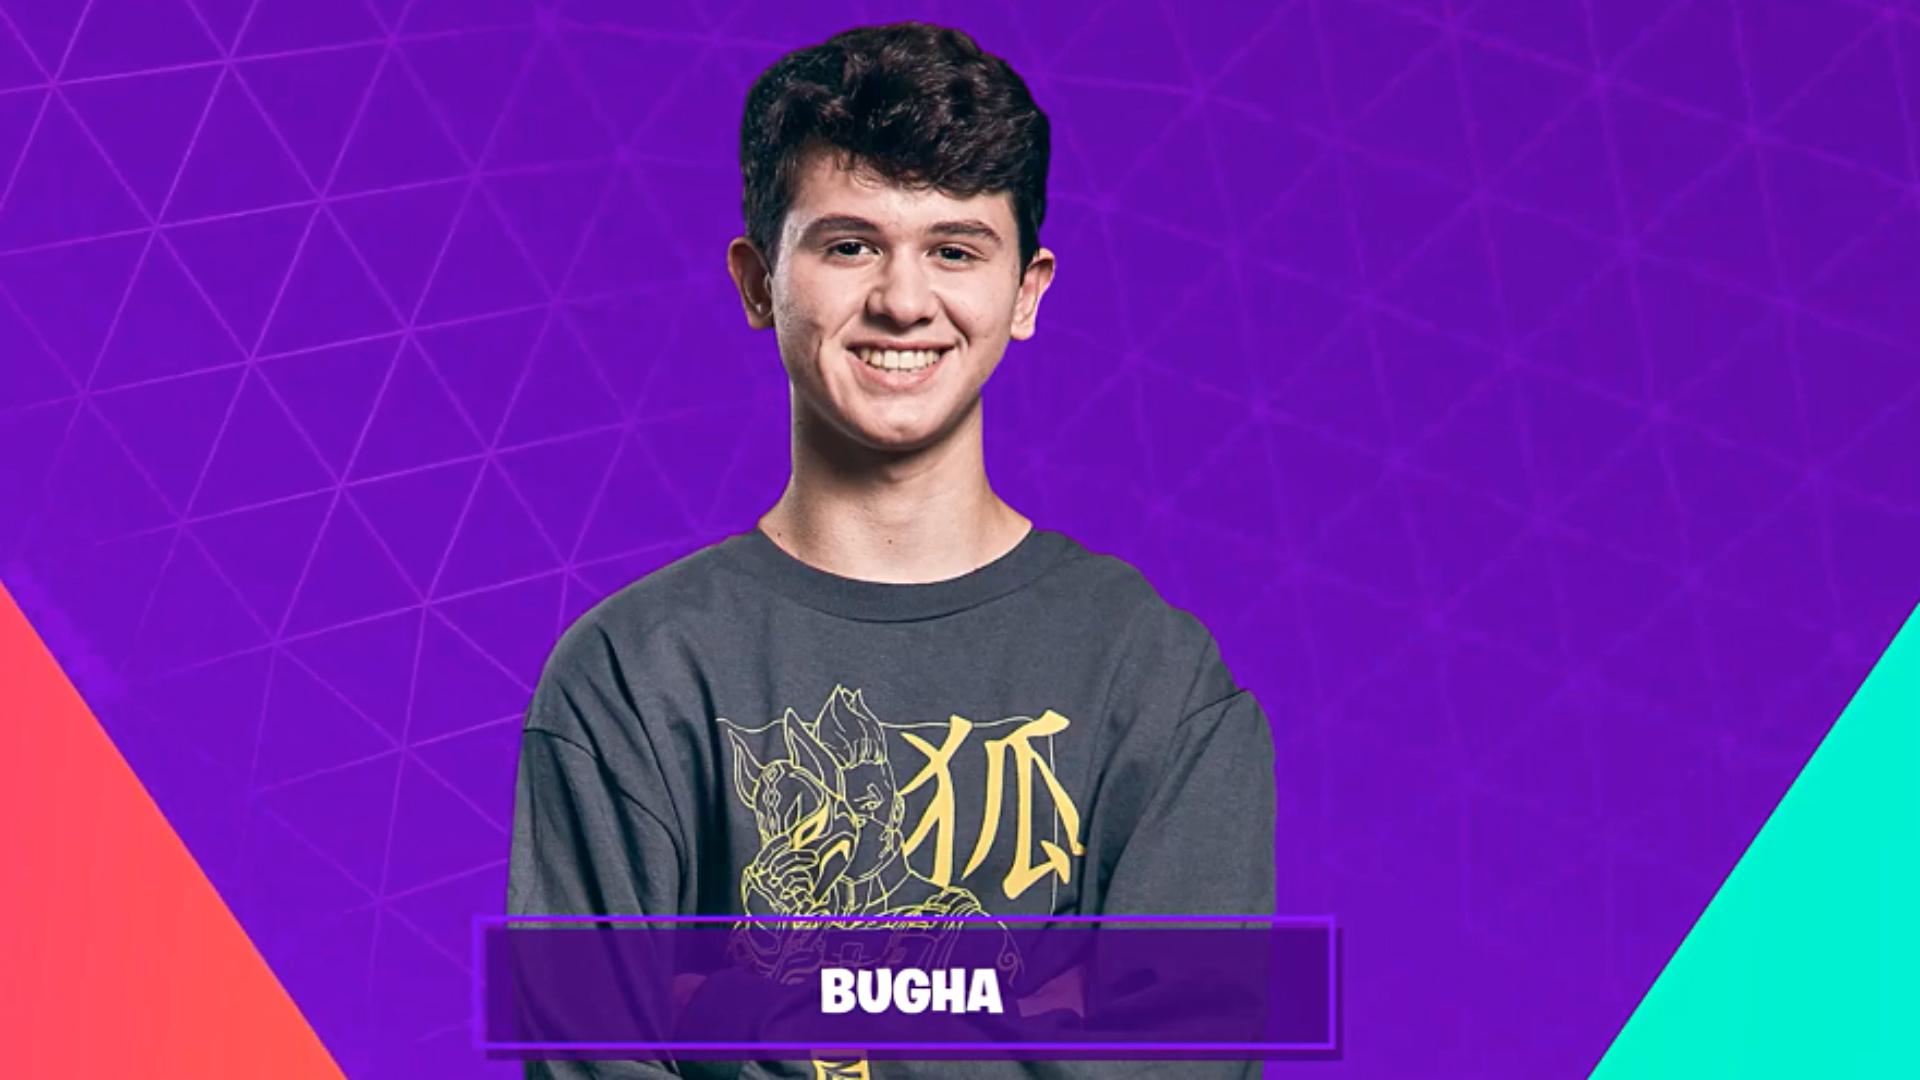 Fortnite World Cup Solos finals results: Bugha dominates to